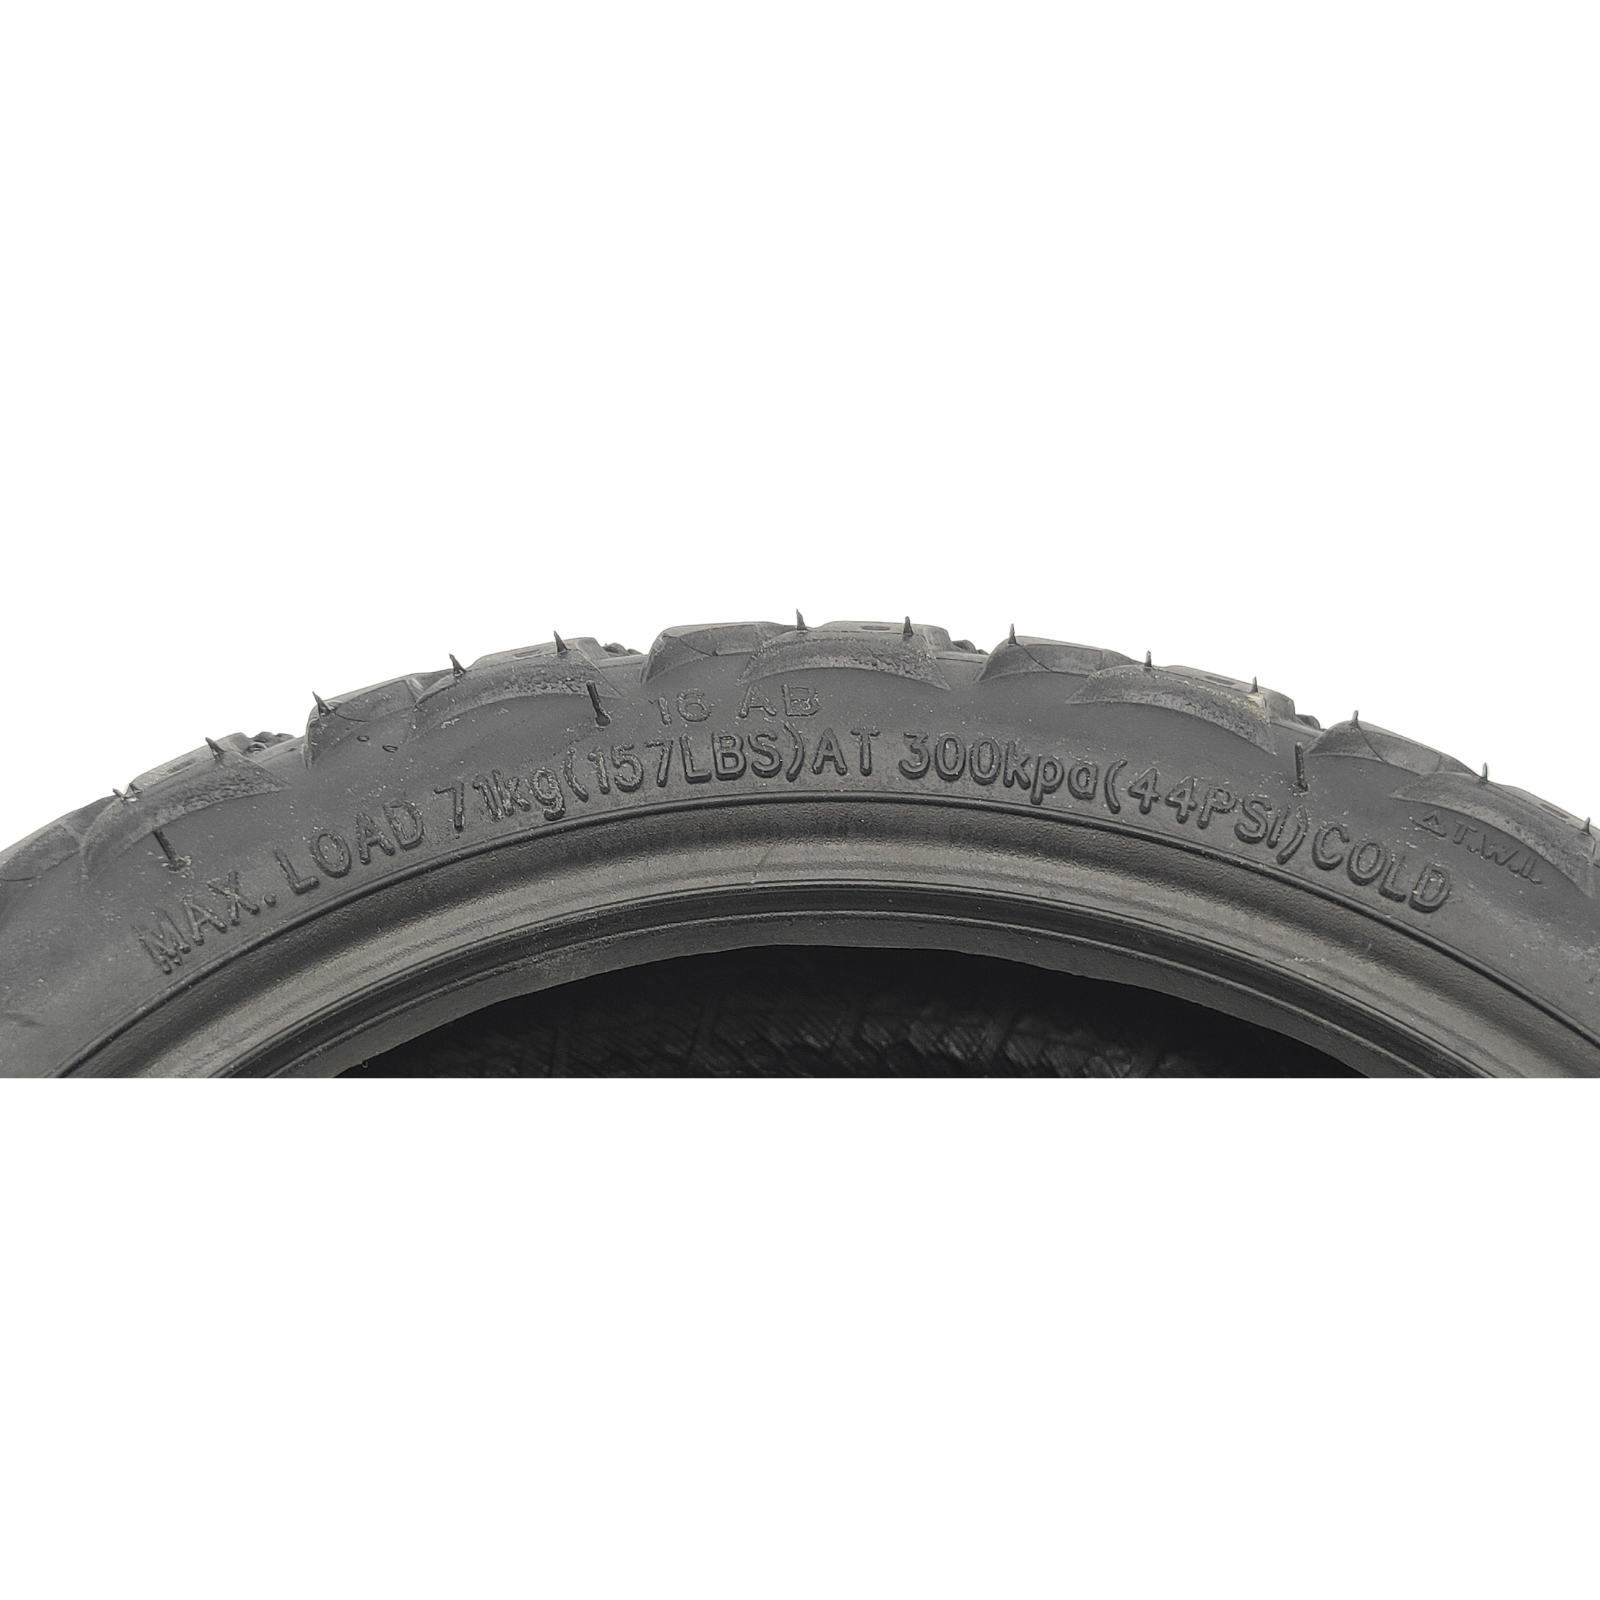 Jeep 2Xe Adventurer off-road tire tubeless 10x2.5-6.5 inch with valve